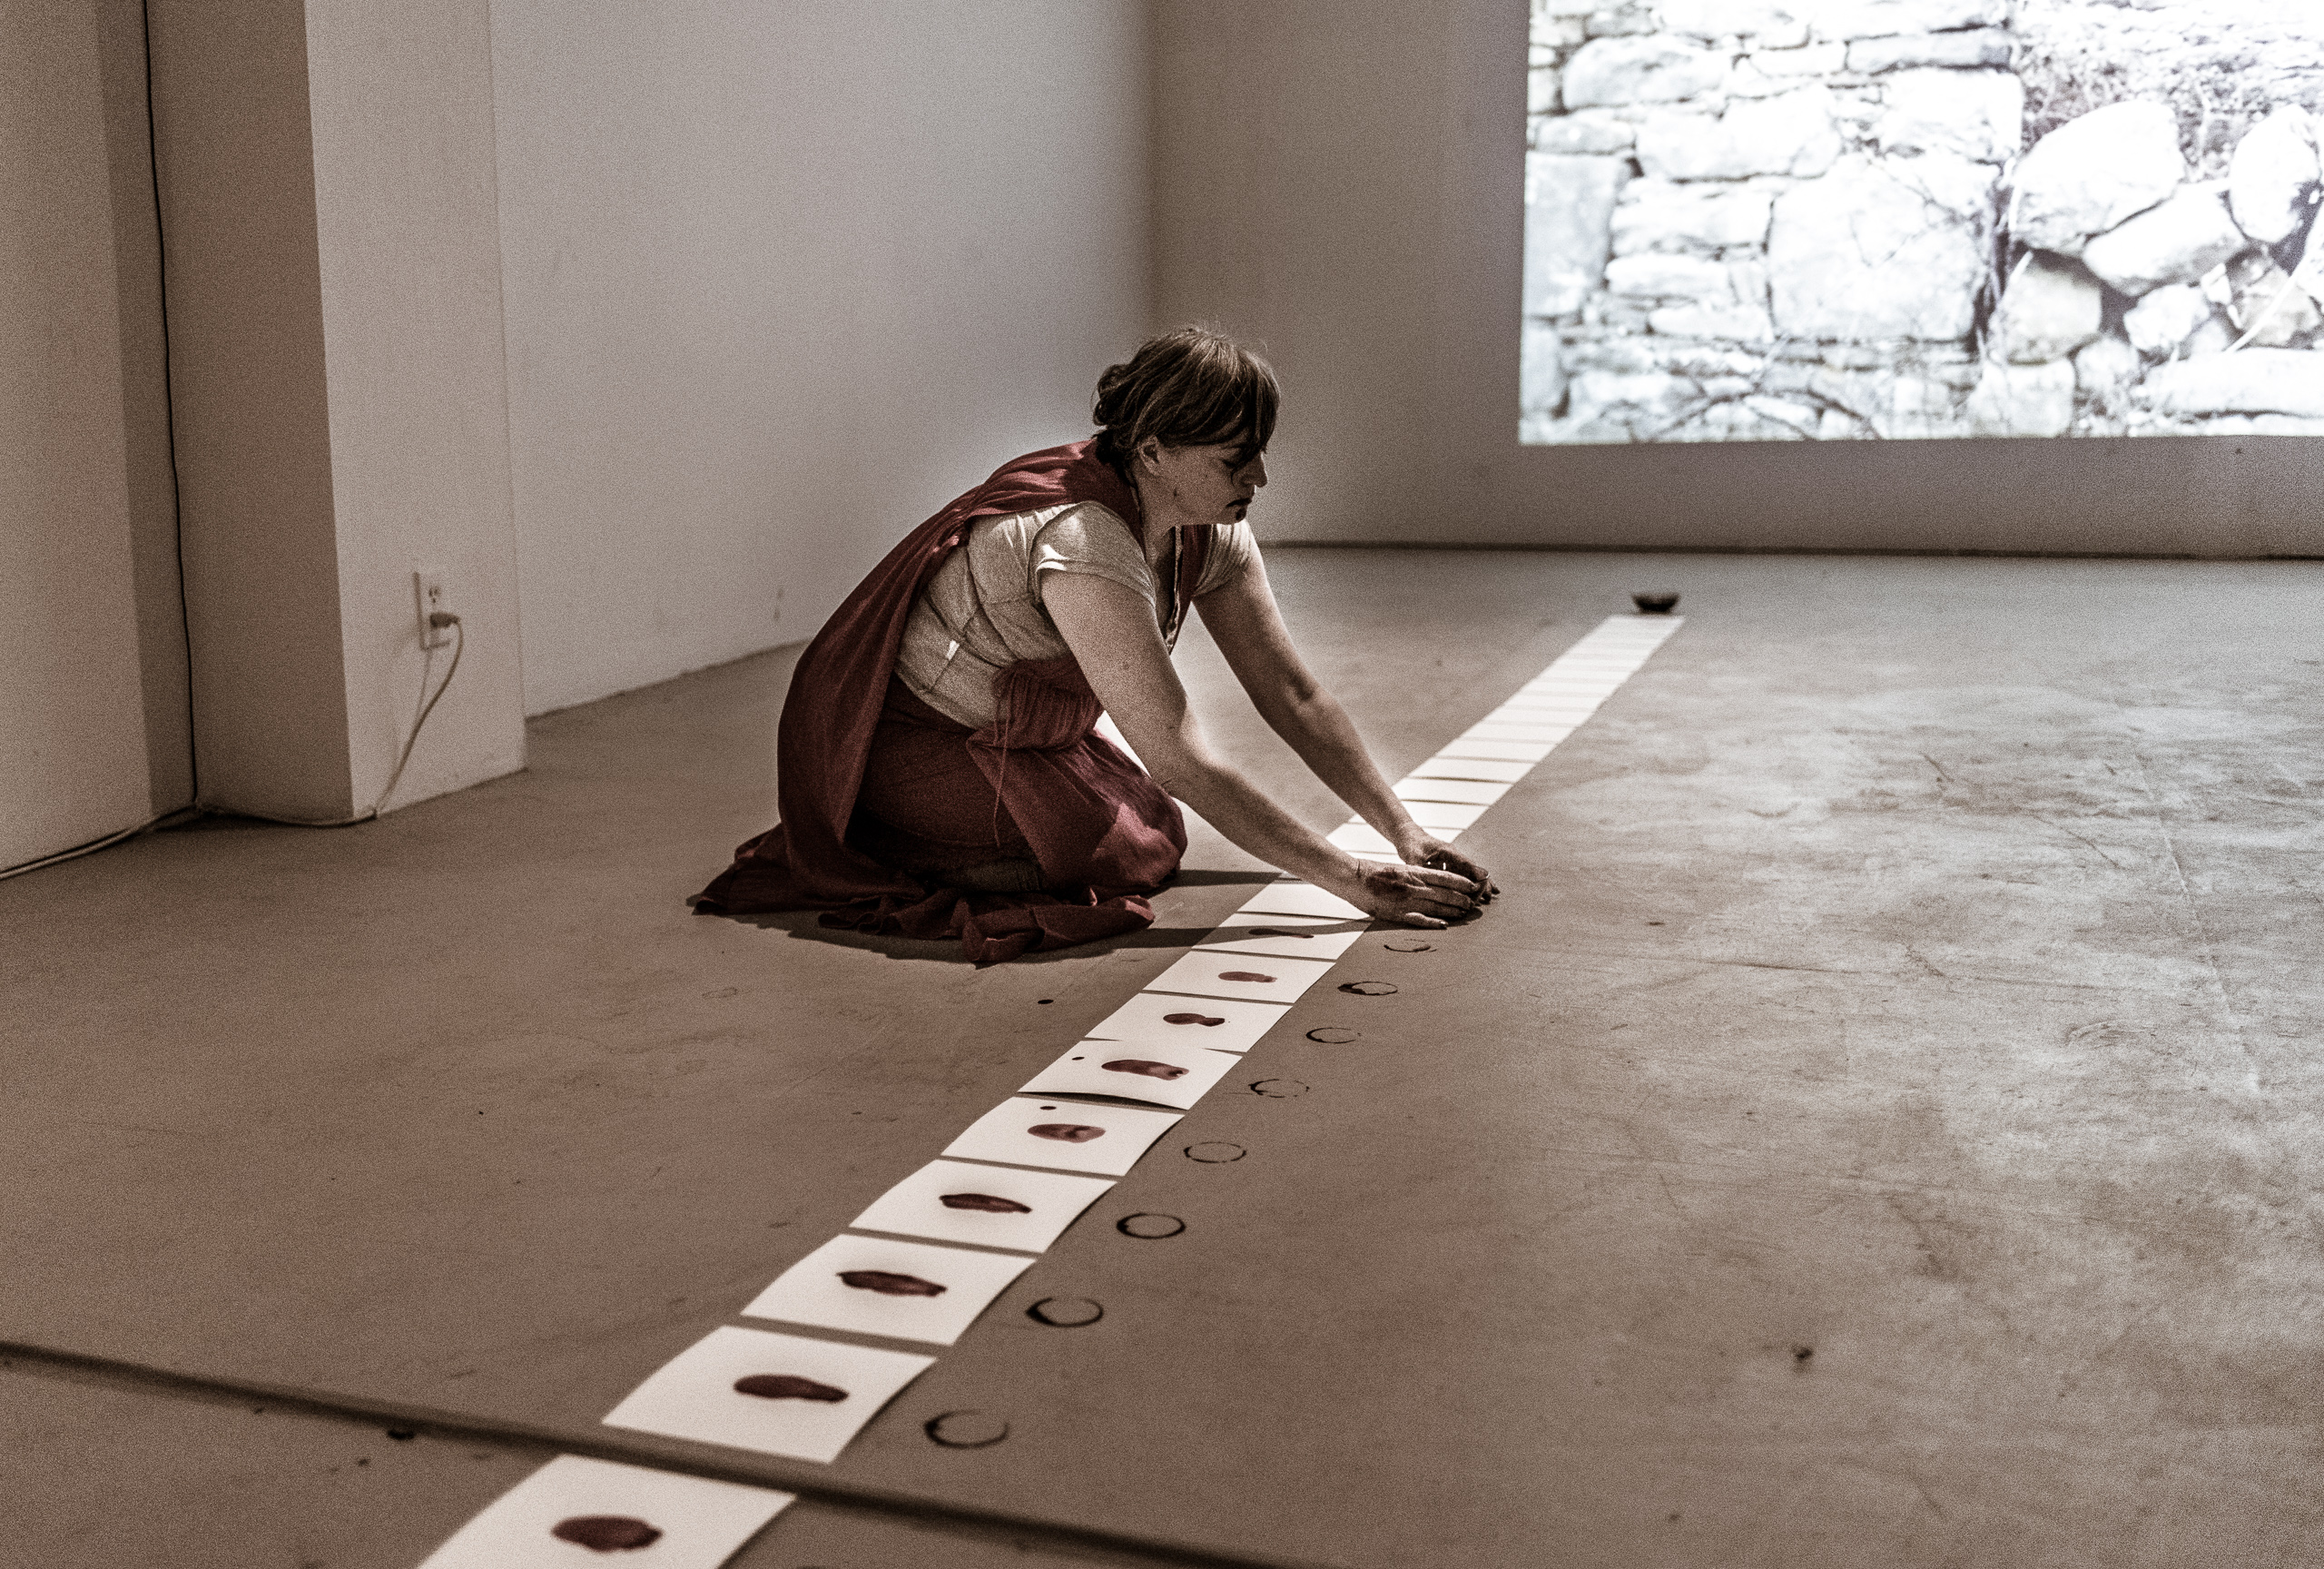 Cindy Rehm performing The Silence at Los Angeles Contemporary Exhibitions.